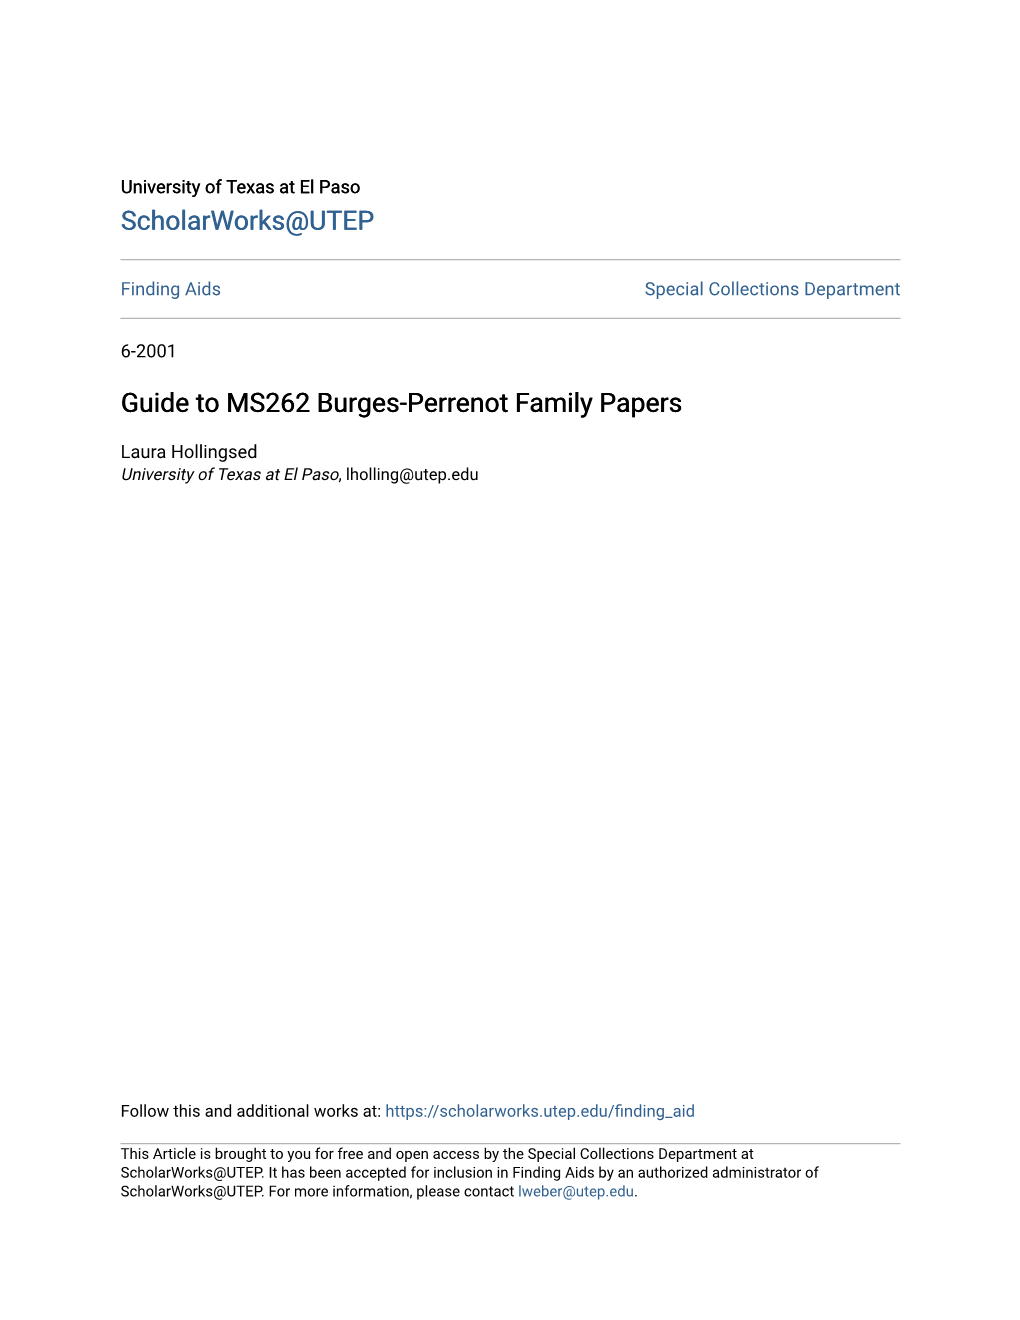 Guide to MS262 Burges-Perrenot Family Papers